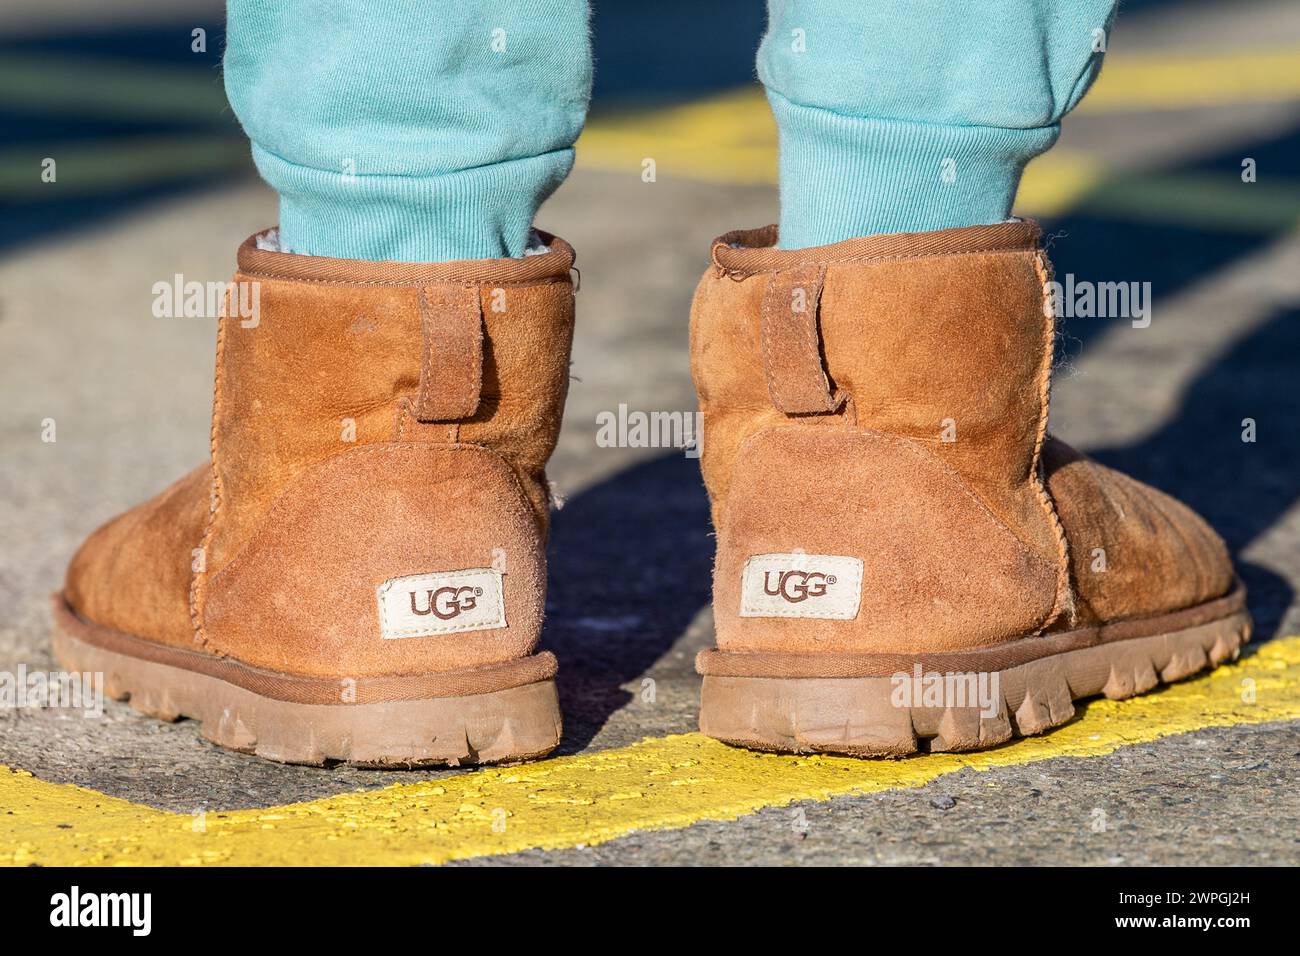 Young girl wearing a fake or counterfeit pair of UGG boots. Stock Photo